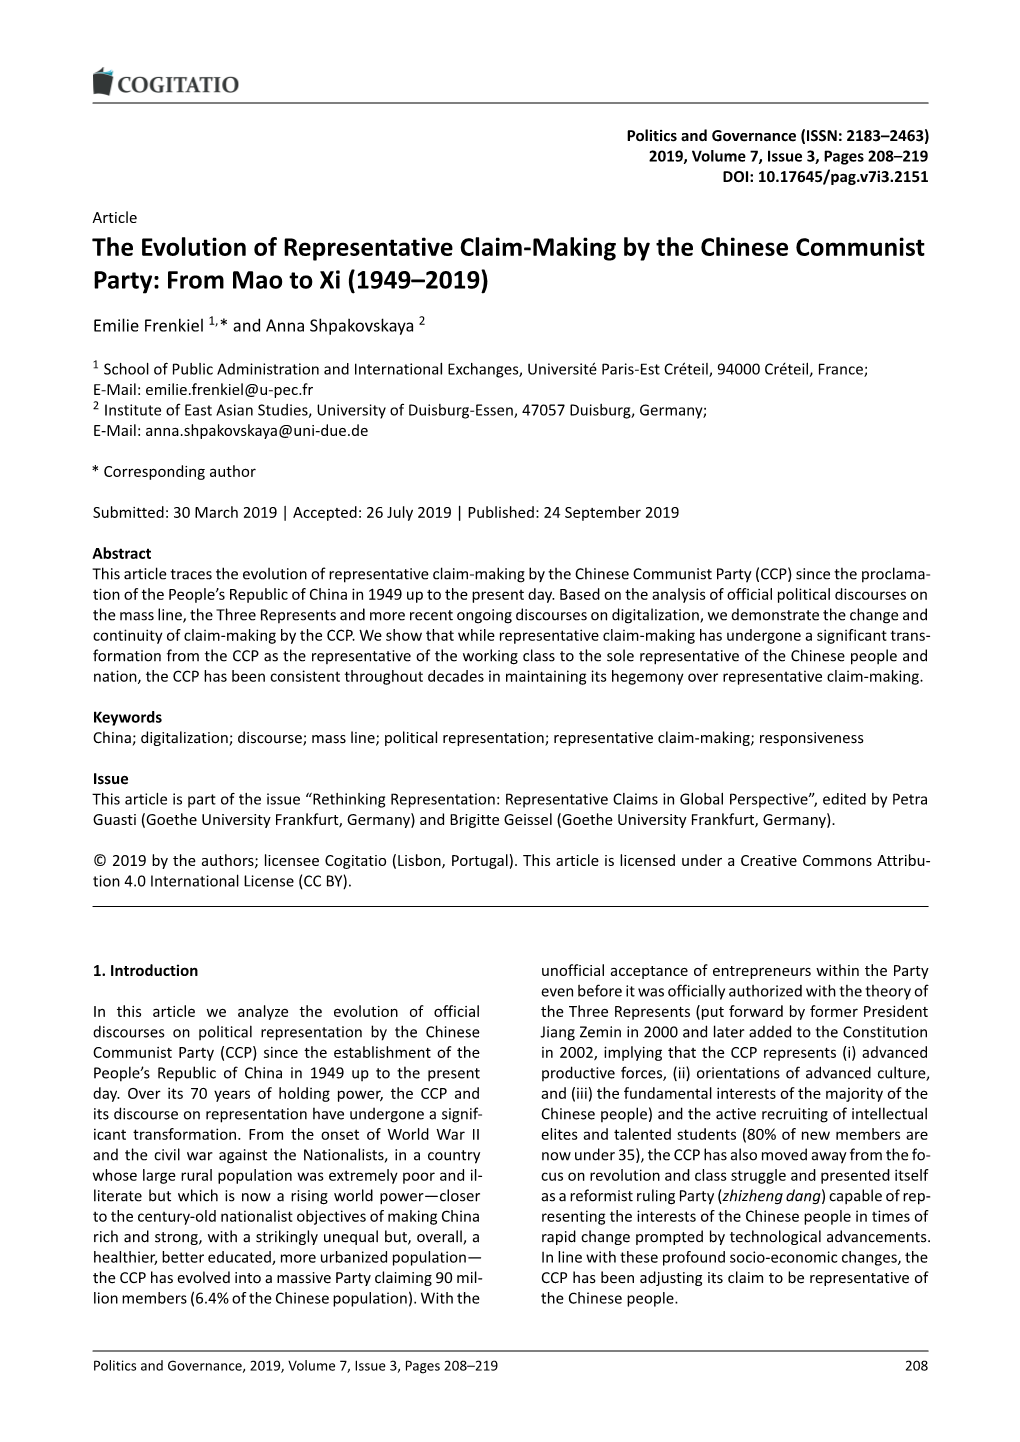 The Evolution of Representative Claim-Making by the Chinese Communist Party: from Mao to Xi (1949–2019)